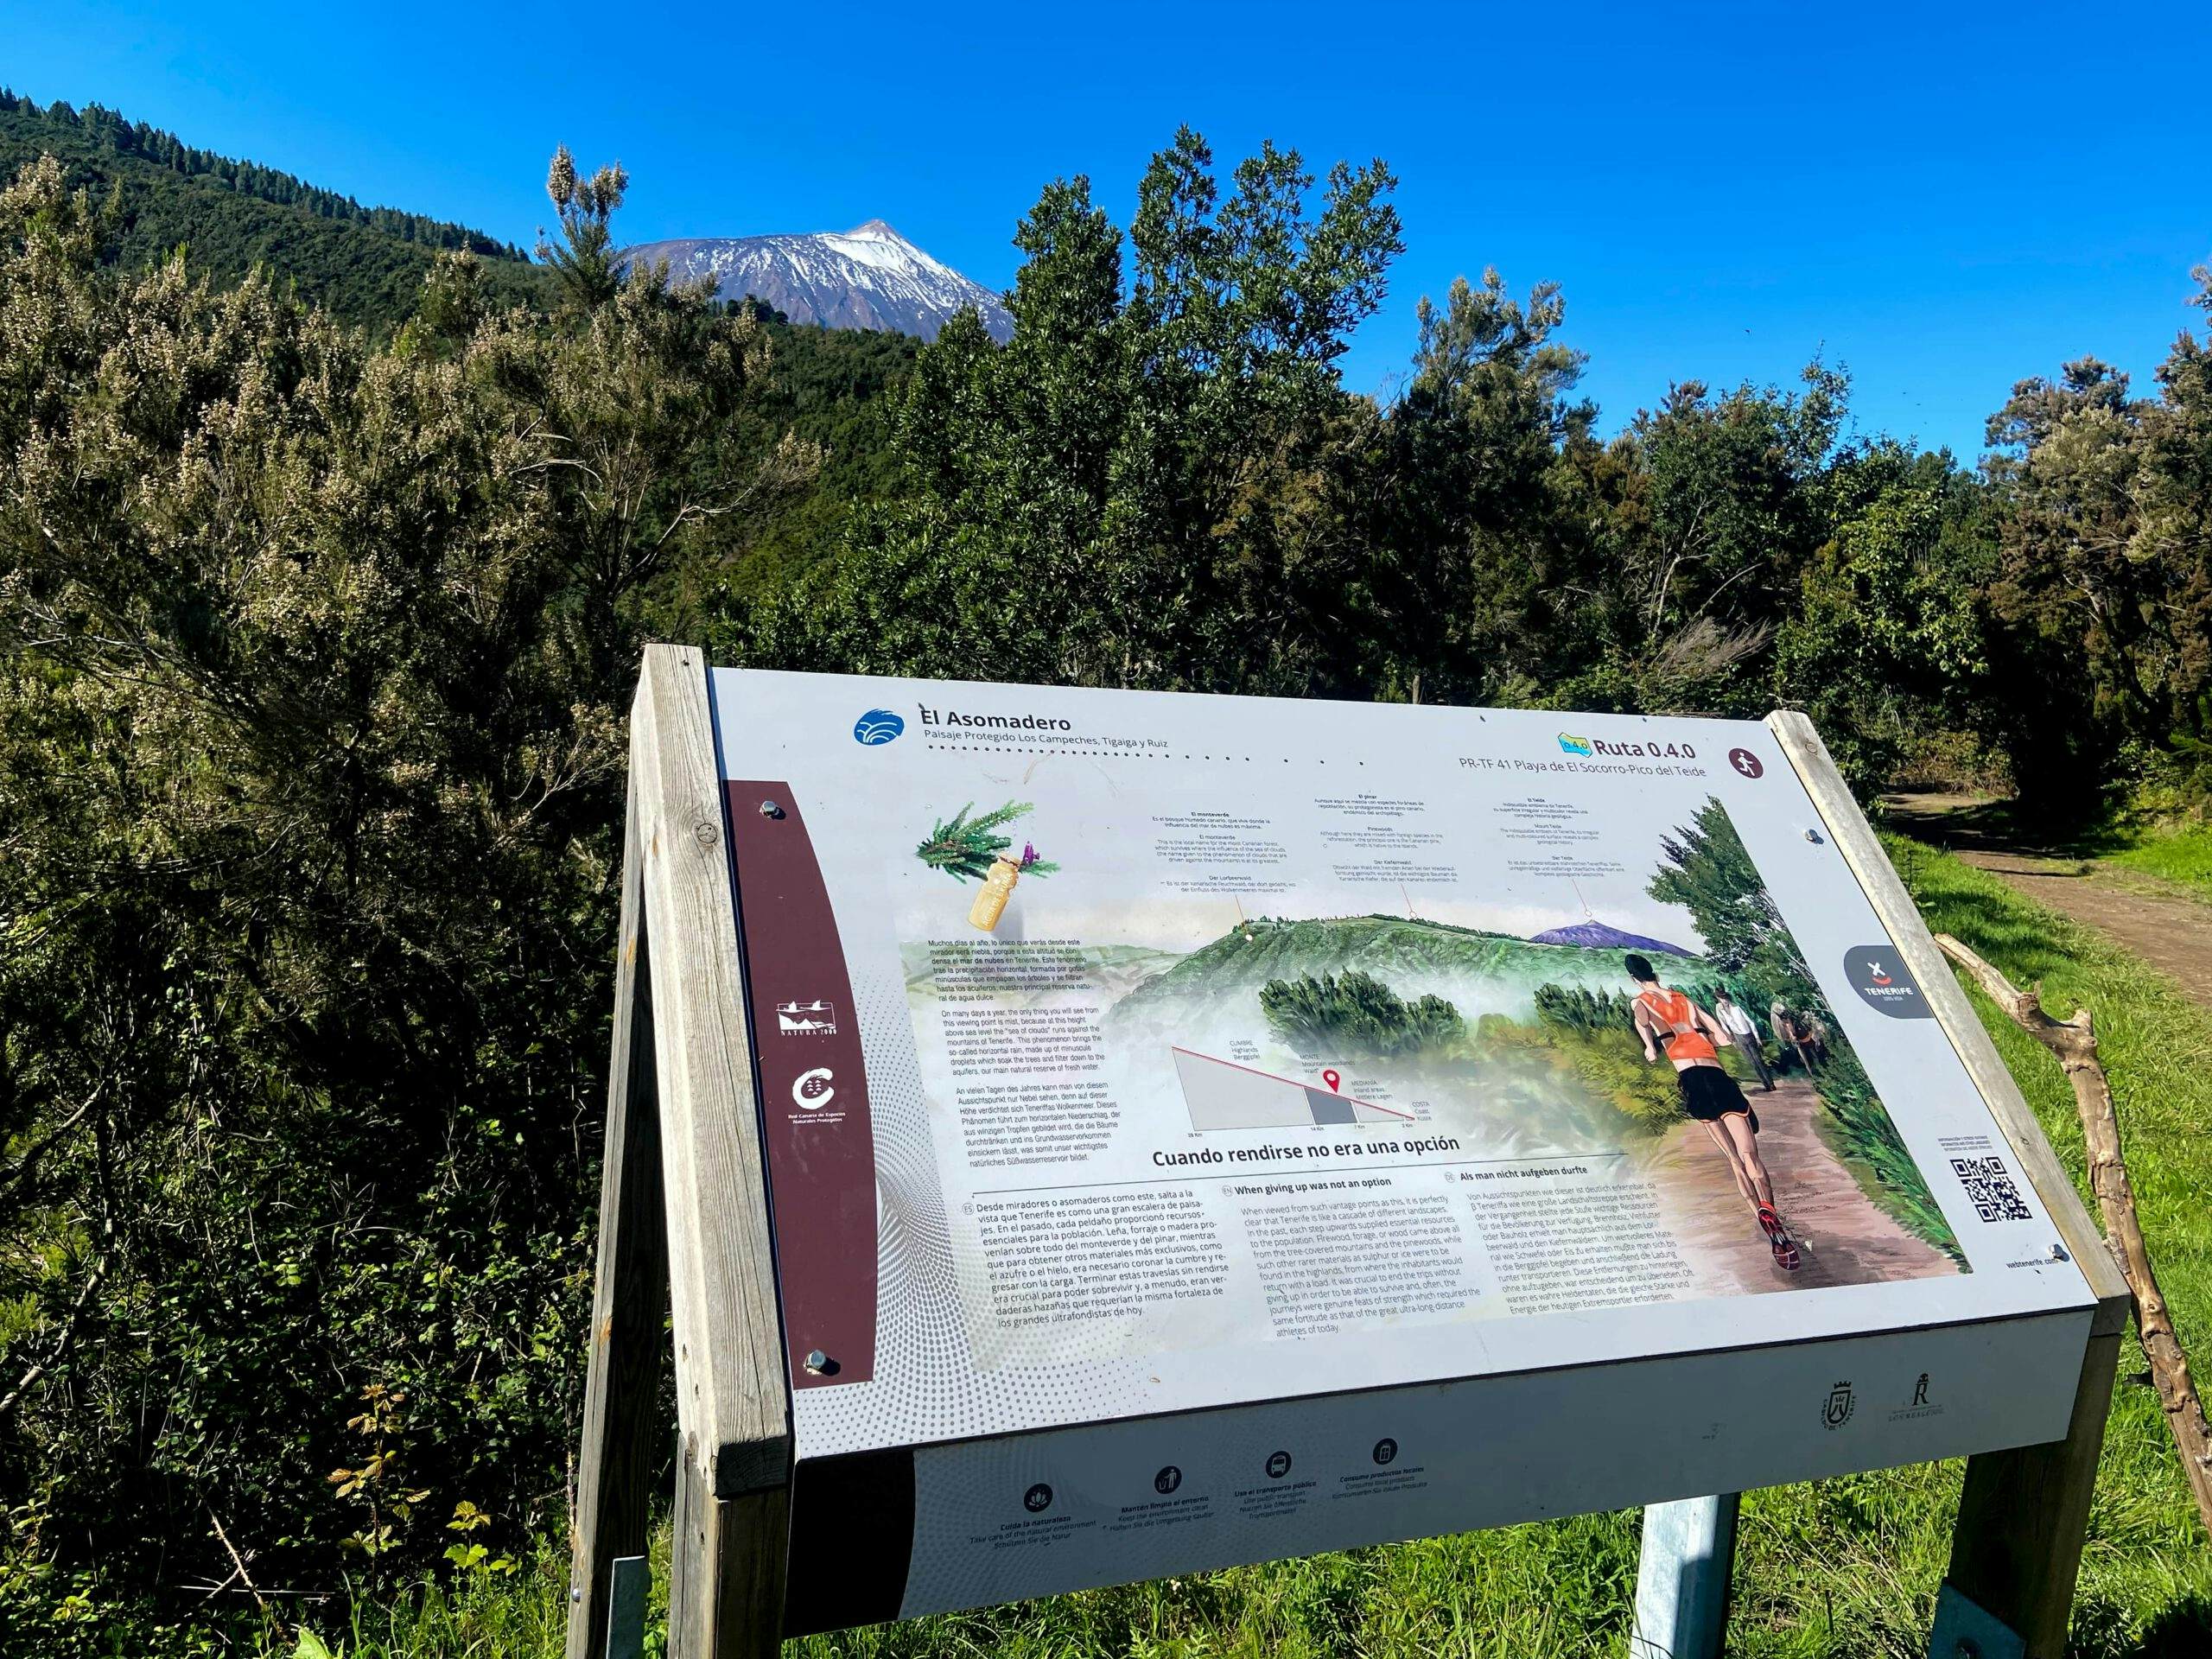 Information board at the Asomadero with Teide in the background